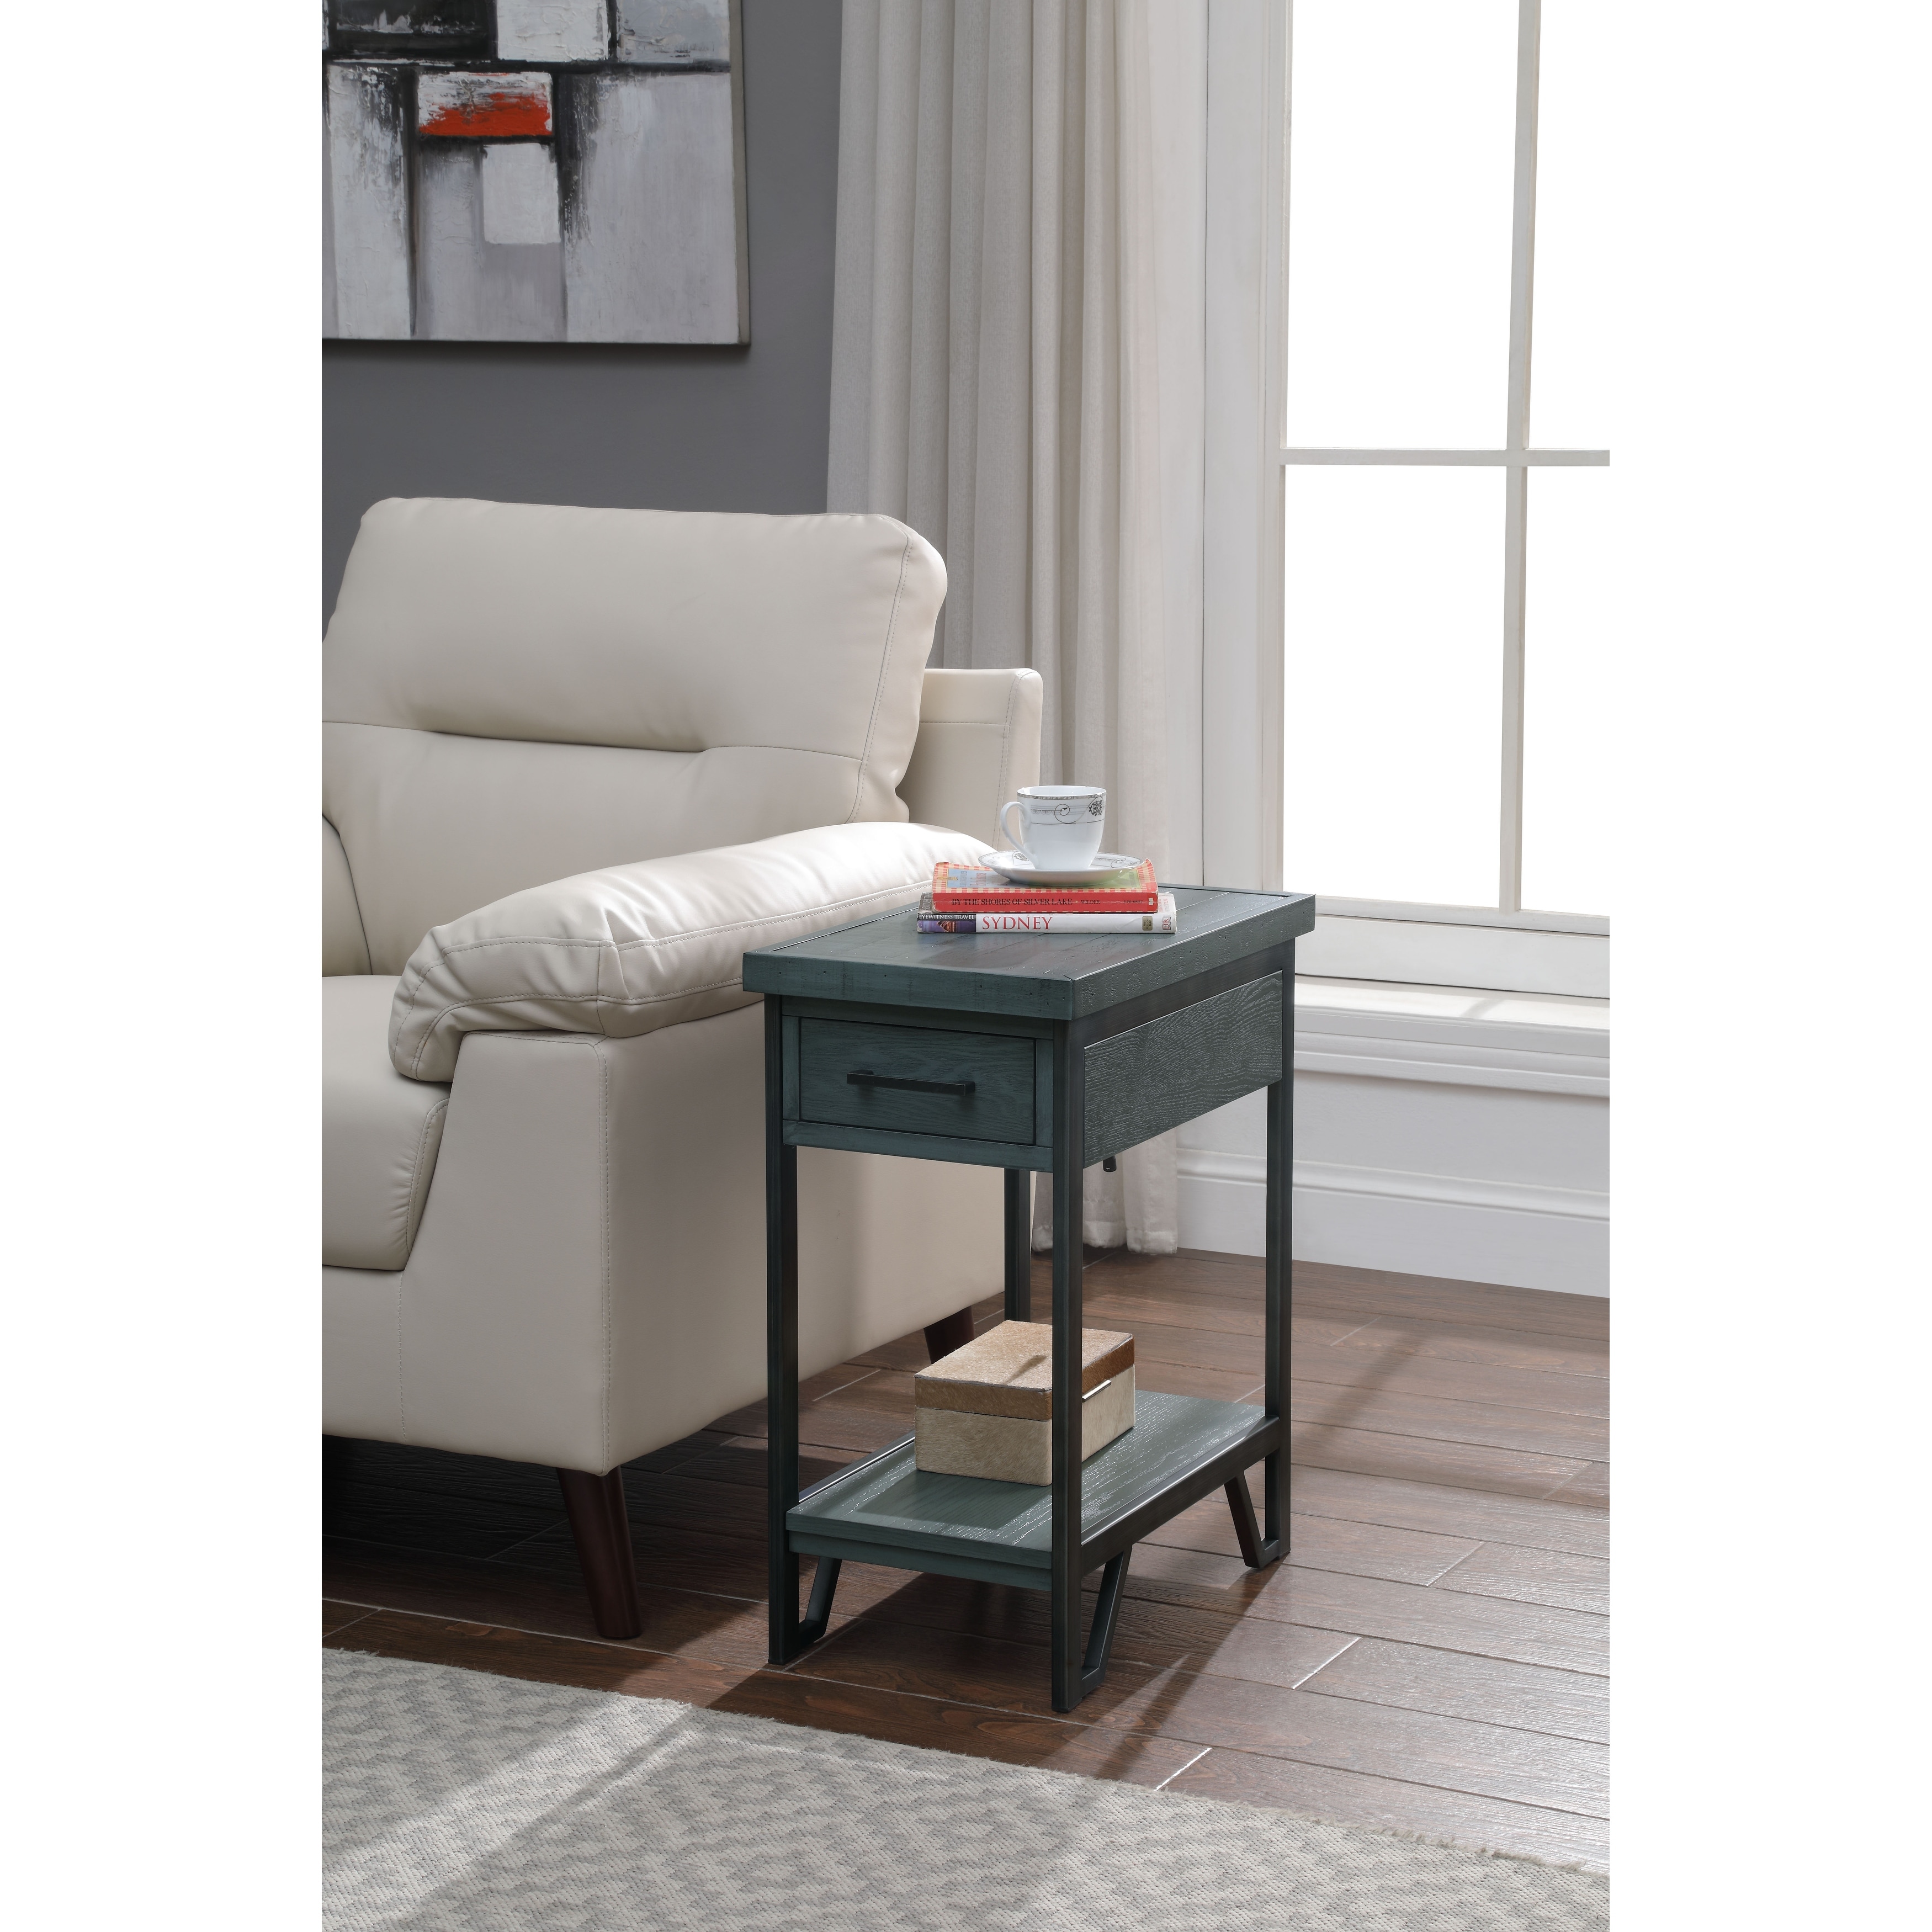 Hatfield Industrial 12-inch Metal 1-shelf 1-drawer Compact End Table with USB Ports